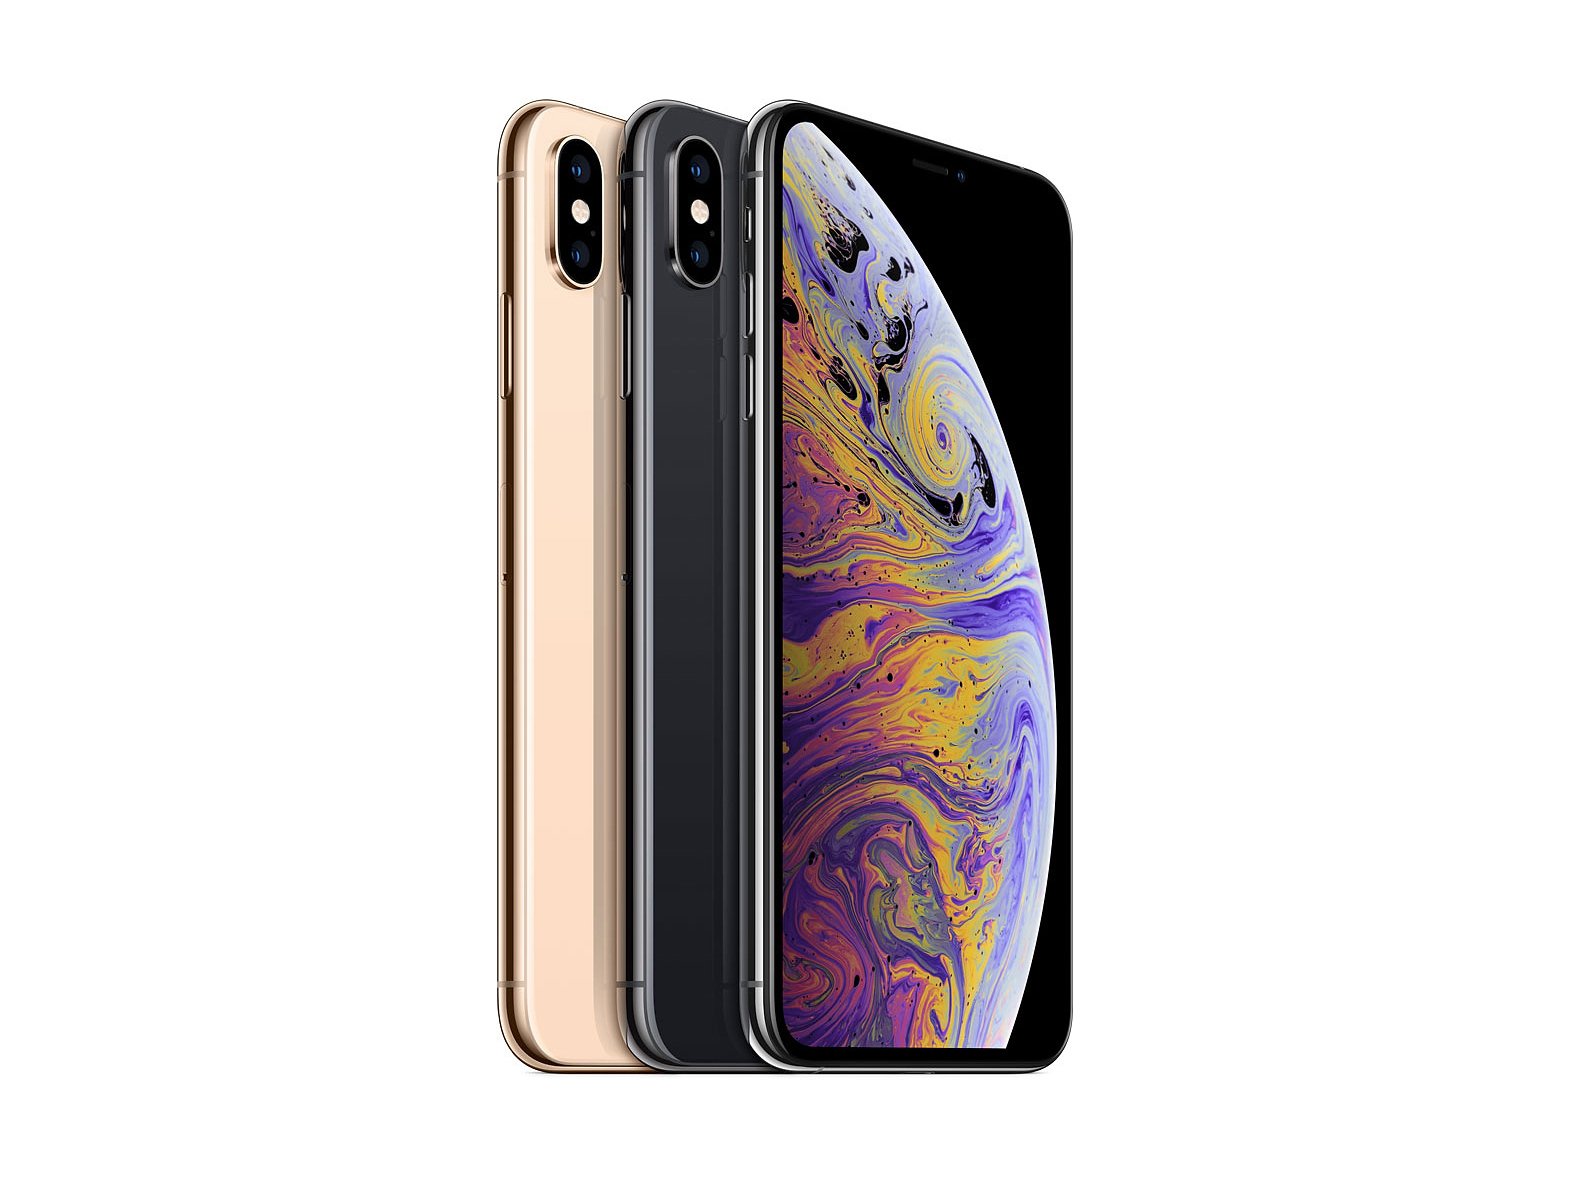 iphone-xs-max-select-2018